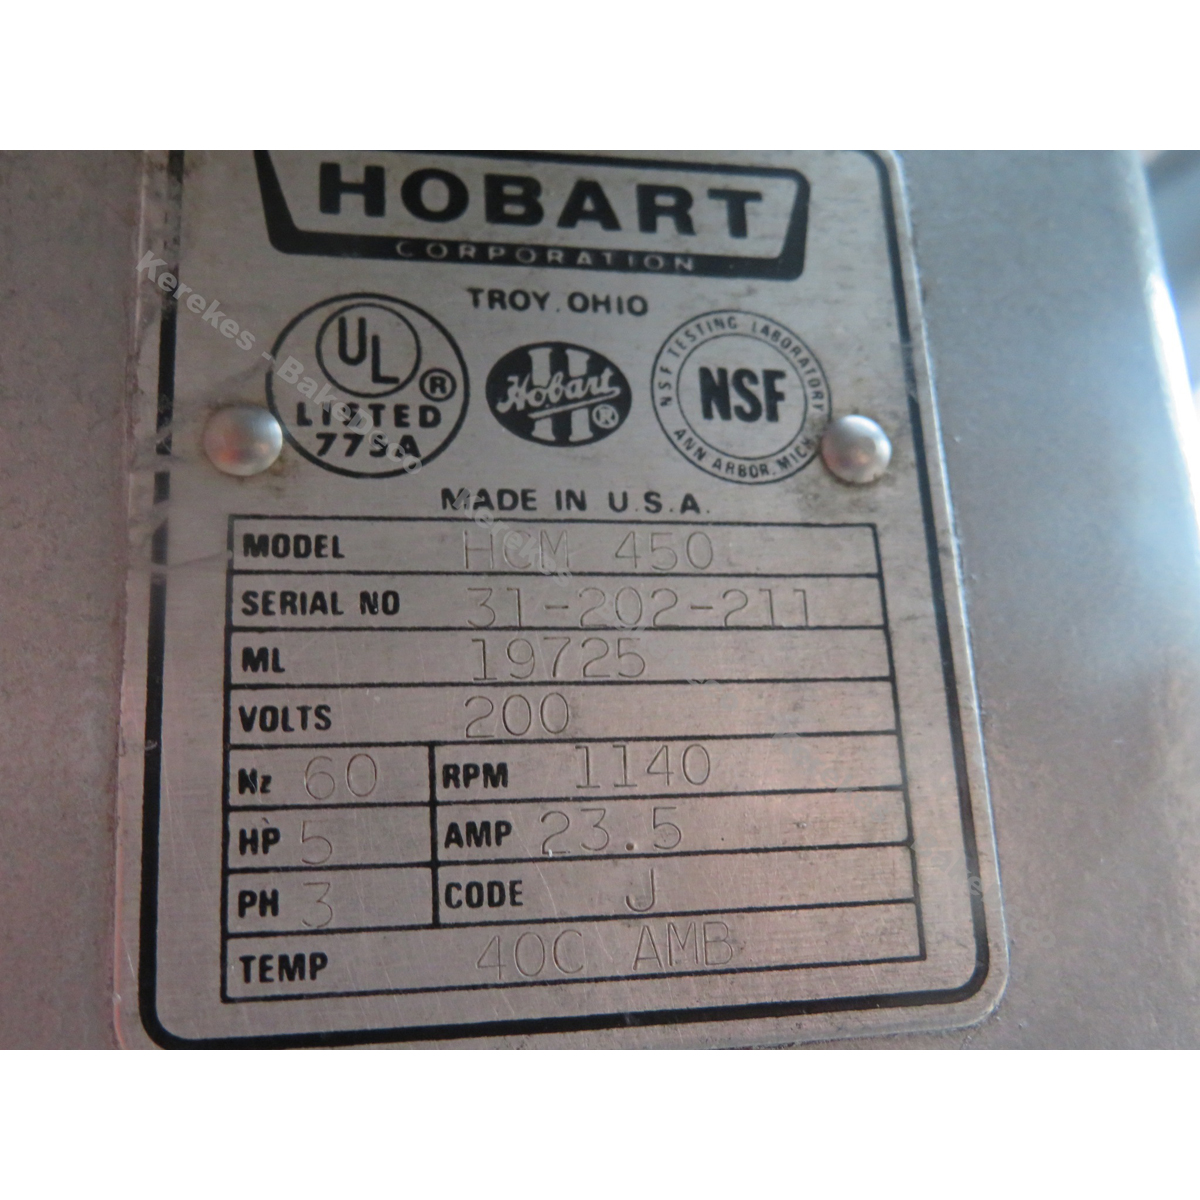 Hobart HCM-450 45 Quart Vertical Cutter Mixer, Used Excellent Condition image 5